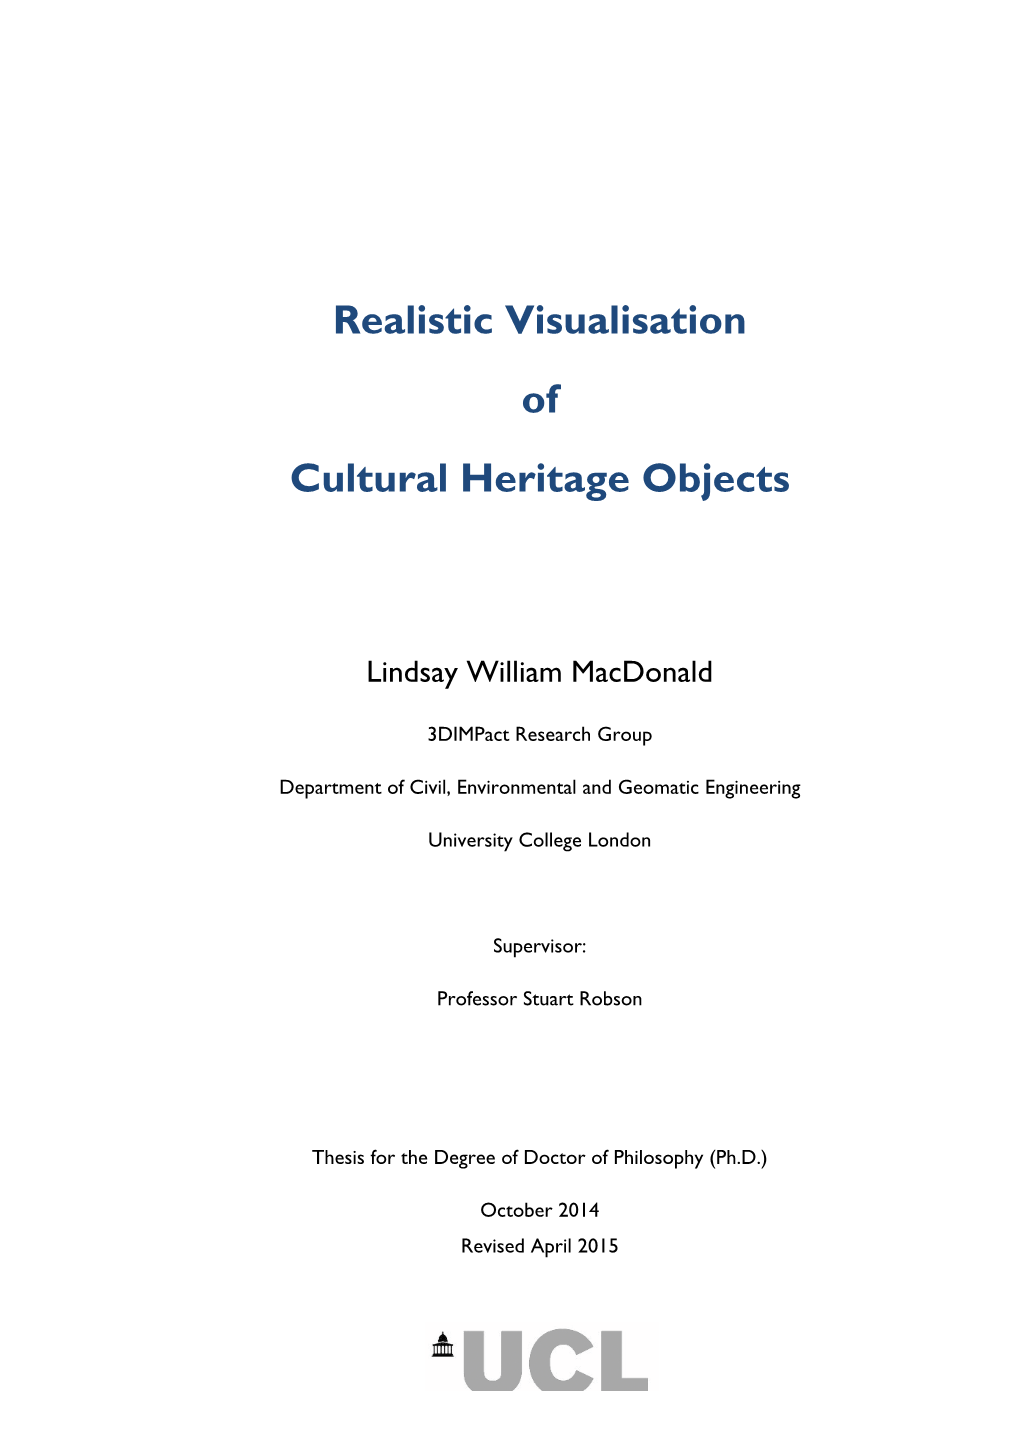 Realistic Visualisation of Cultural Heritage Objects